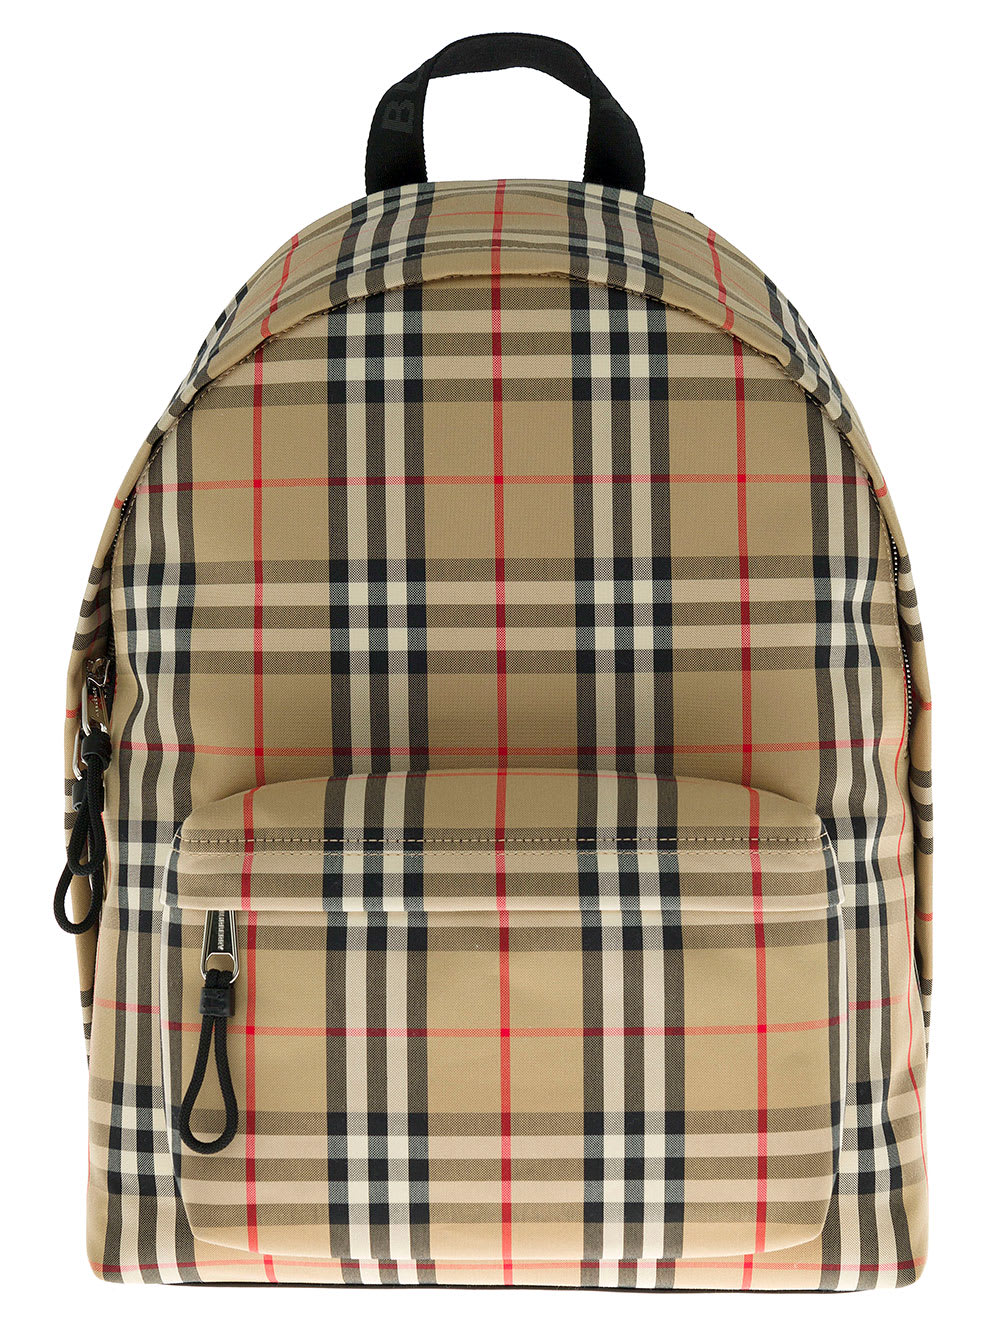 Burberry Mans Vintage Check Fabric Backpack